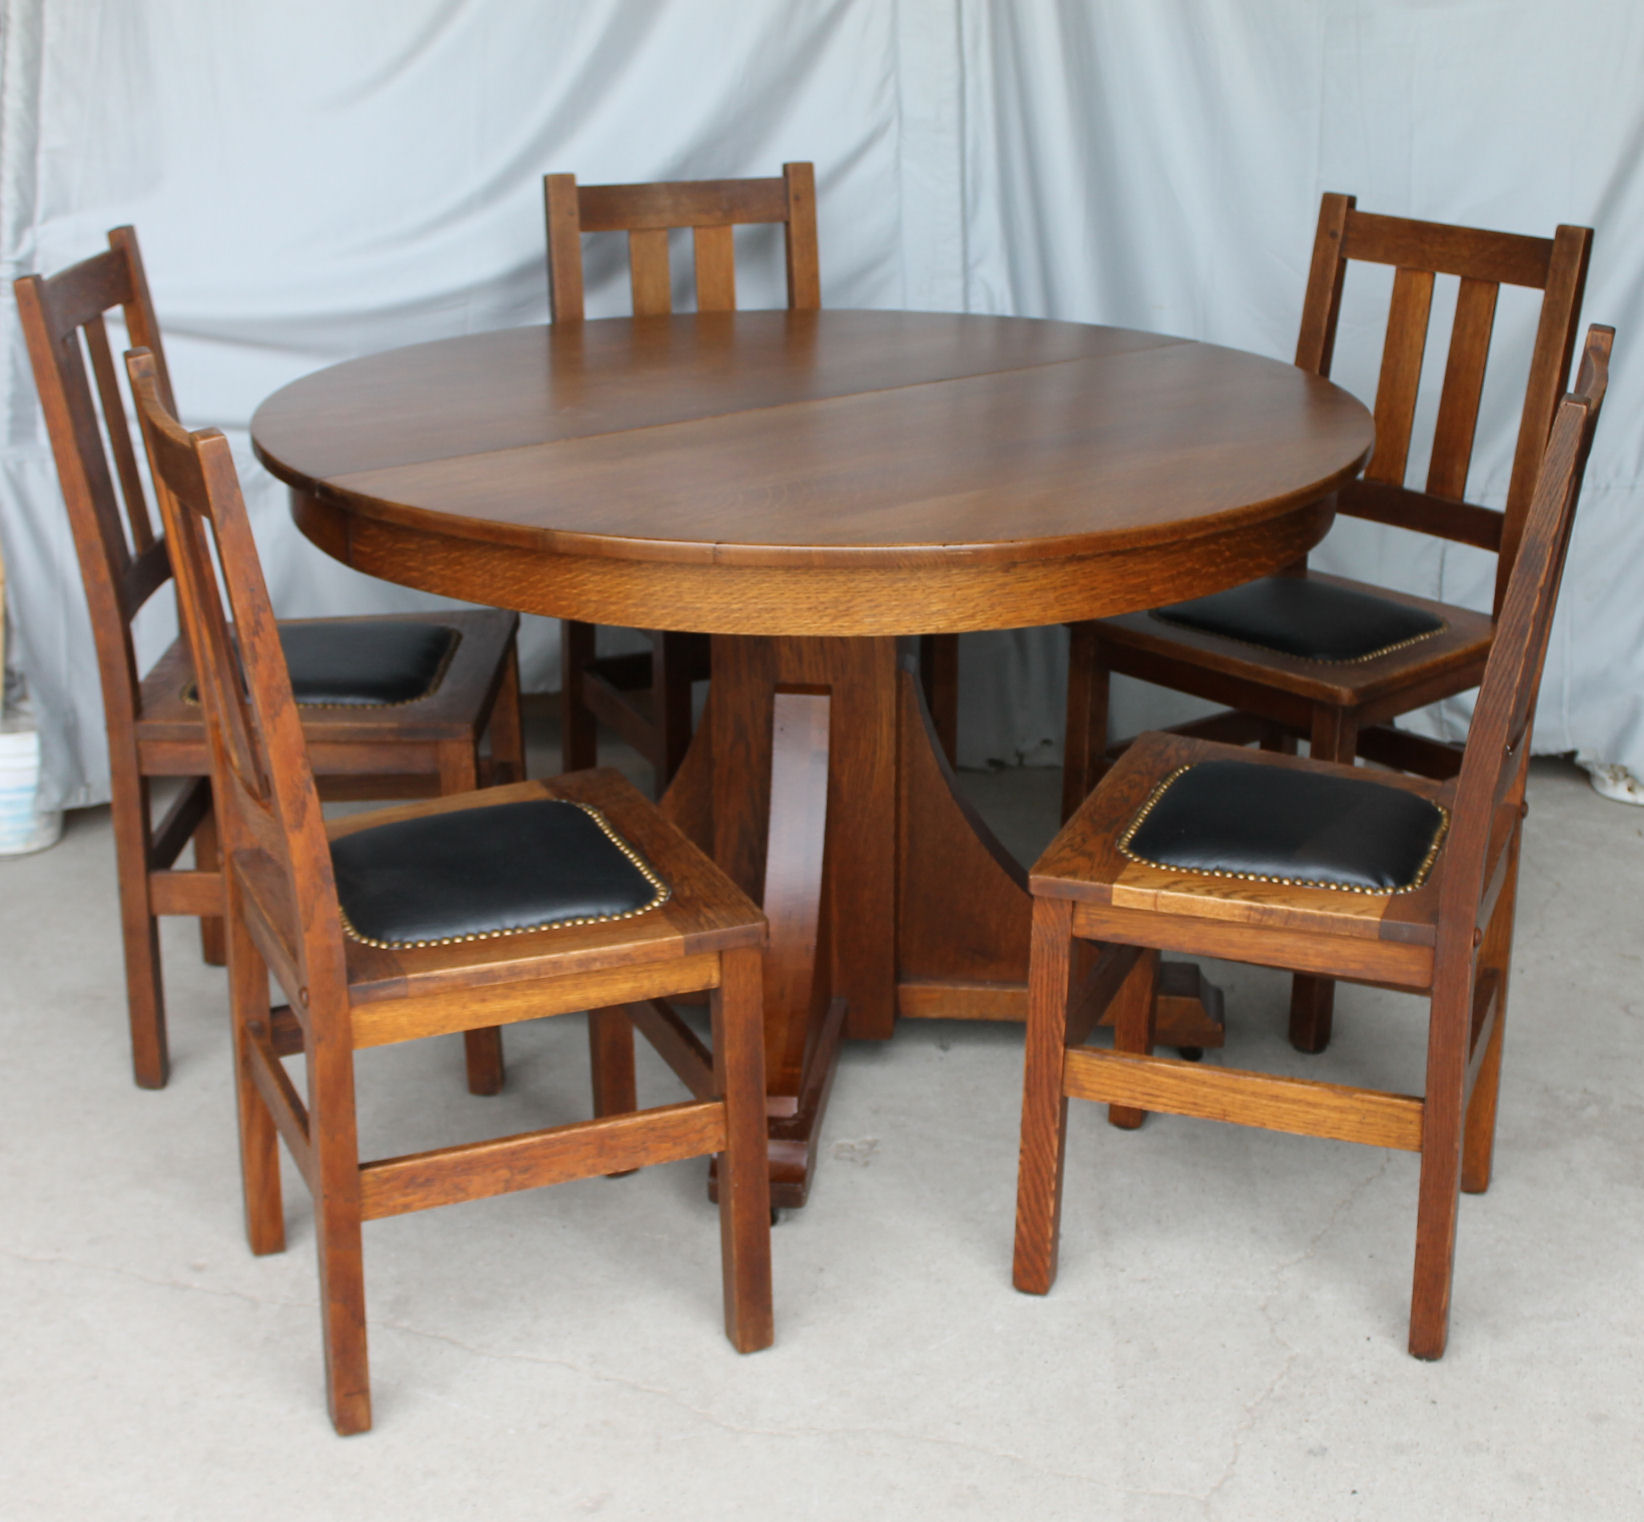 Bargain Johns Antiques Mission Oak Antique Dining Set Stickley Brothers Table Chairs Bargain Johns Antiques